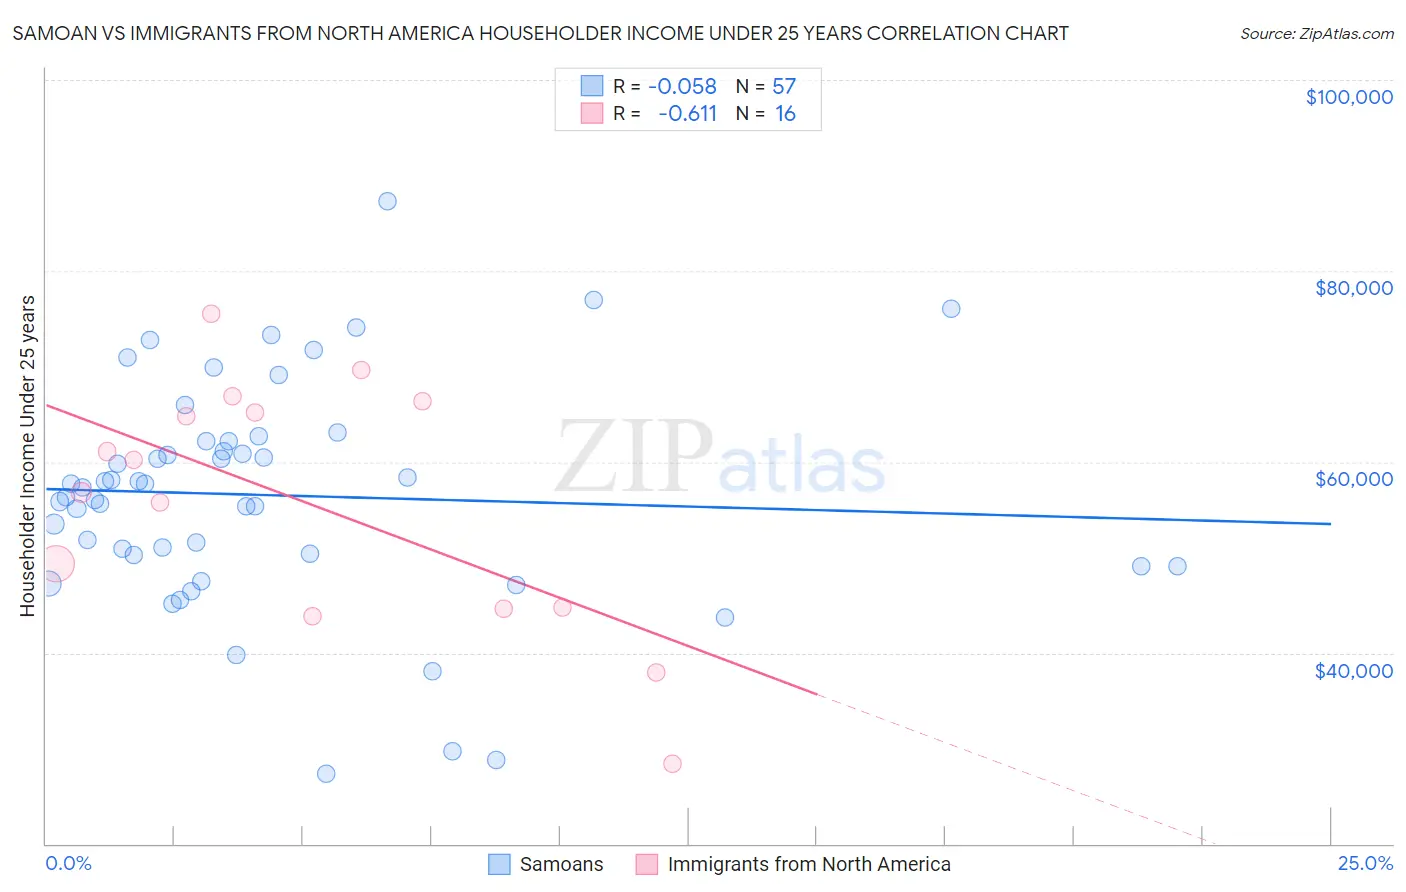 Samoan vs Immigrants from North America Householder Income Under 25 years